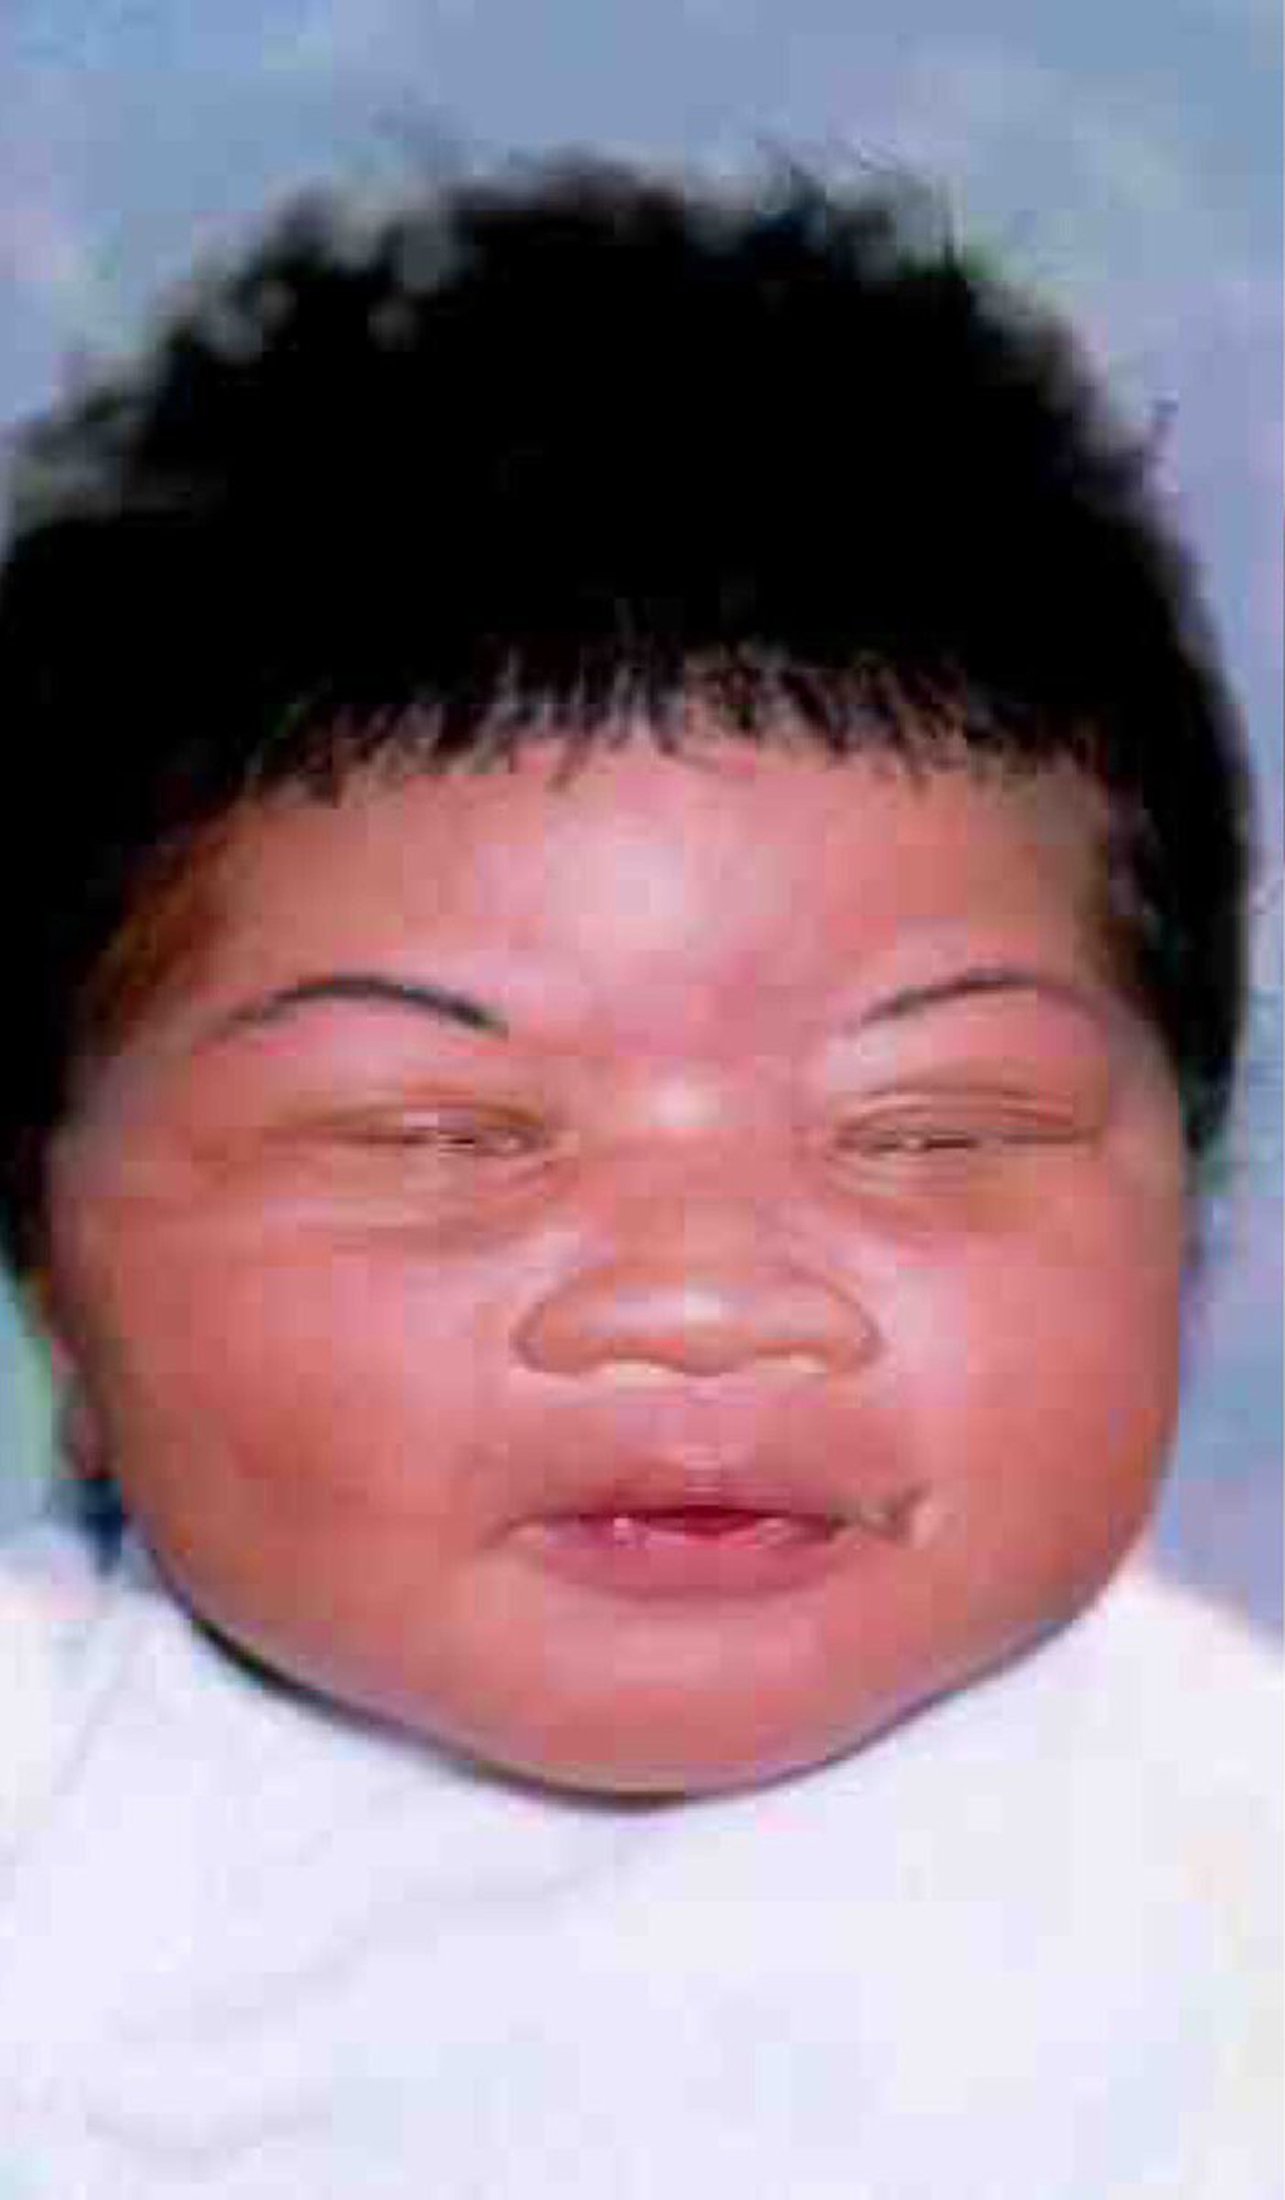 A photo of Kamiyah Mobley, an infant girl who was kidnapped by a woman, first provided by police in 1998. (Jacksonville Sheriff's Office/AP)